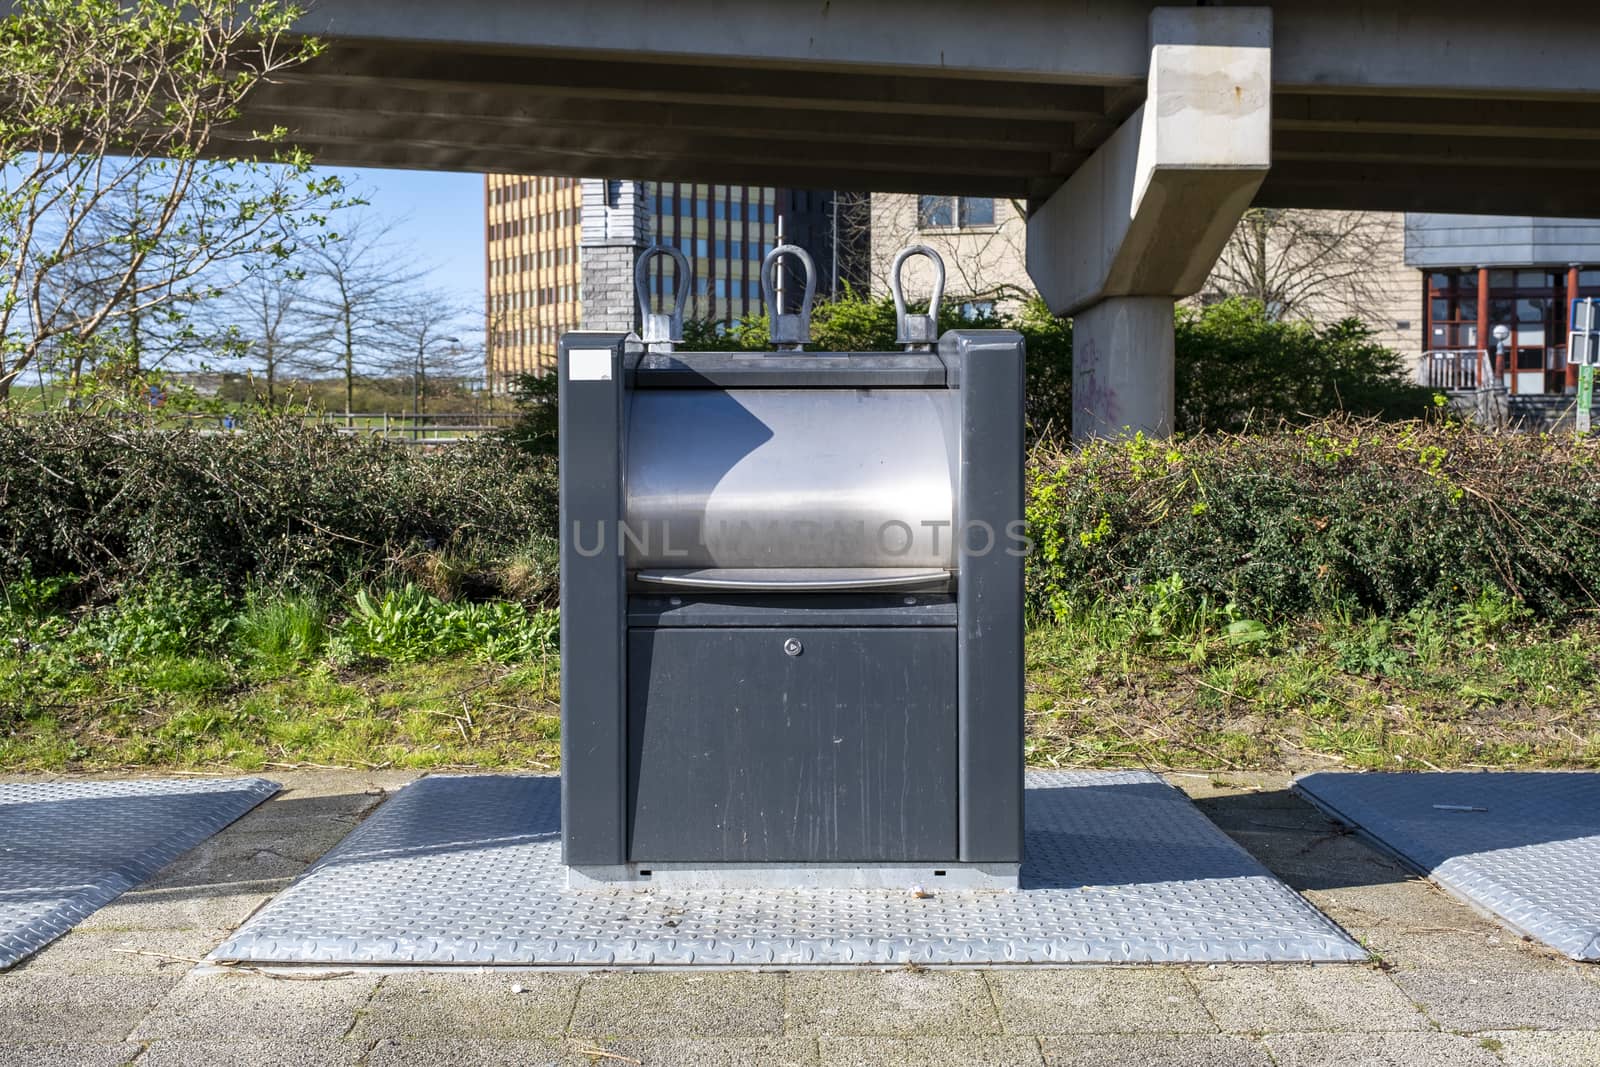 Modern waste bin for separate collection of trash and recyclable waste